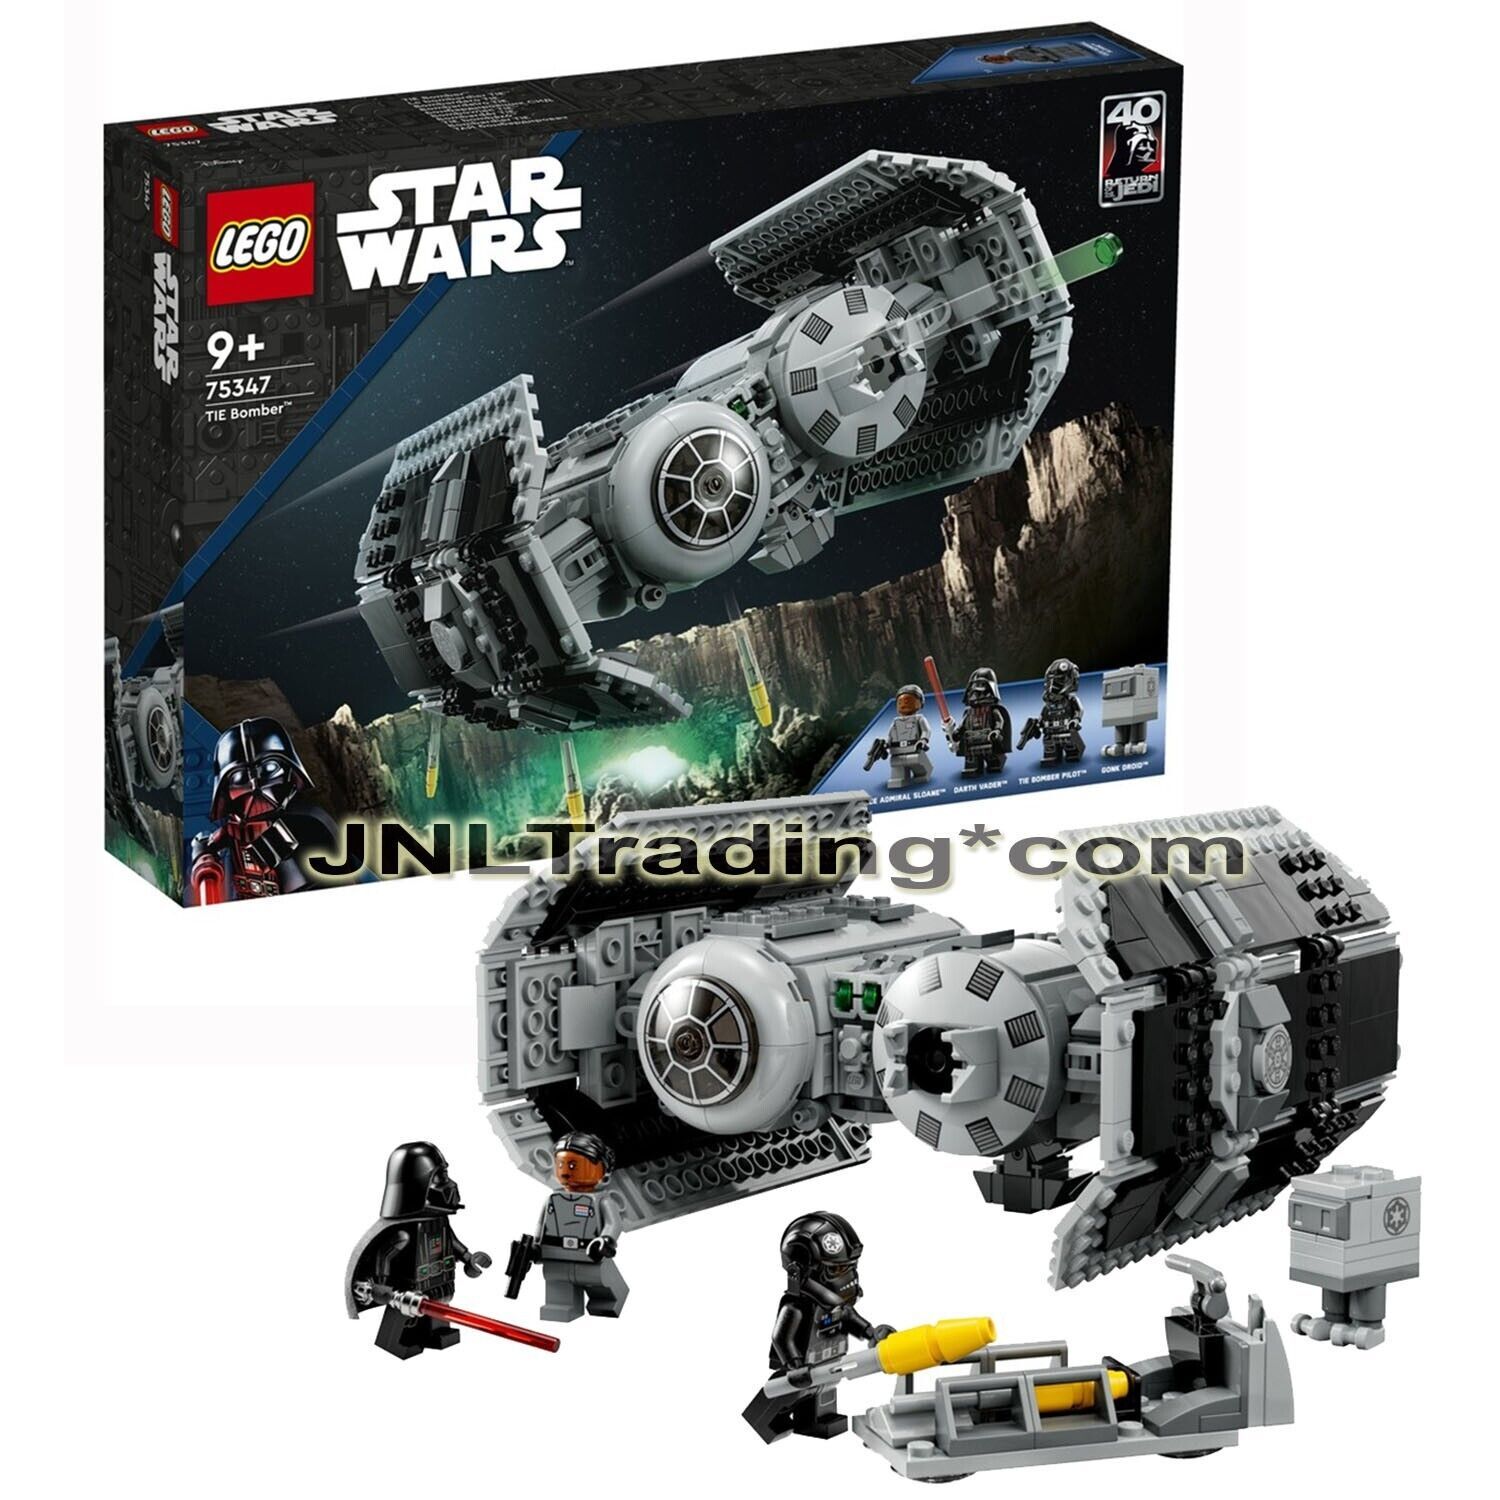 Primary image for Yr 2023 Lego Star Wars 75347 TIE BOMBER with Darth Vader, Sloane, Pilot & Droid